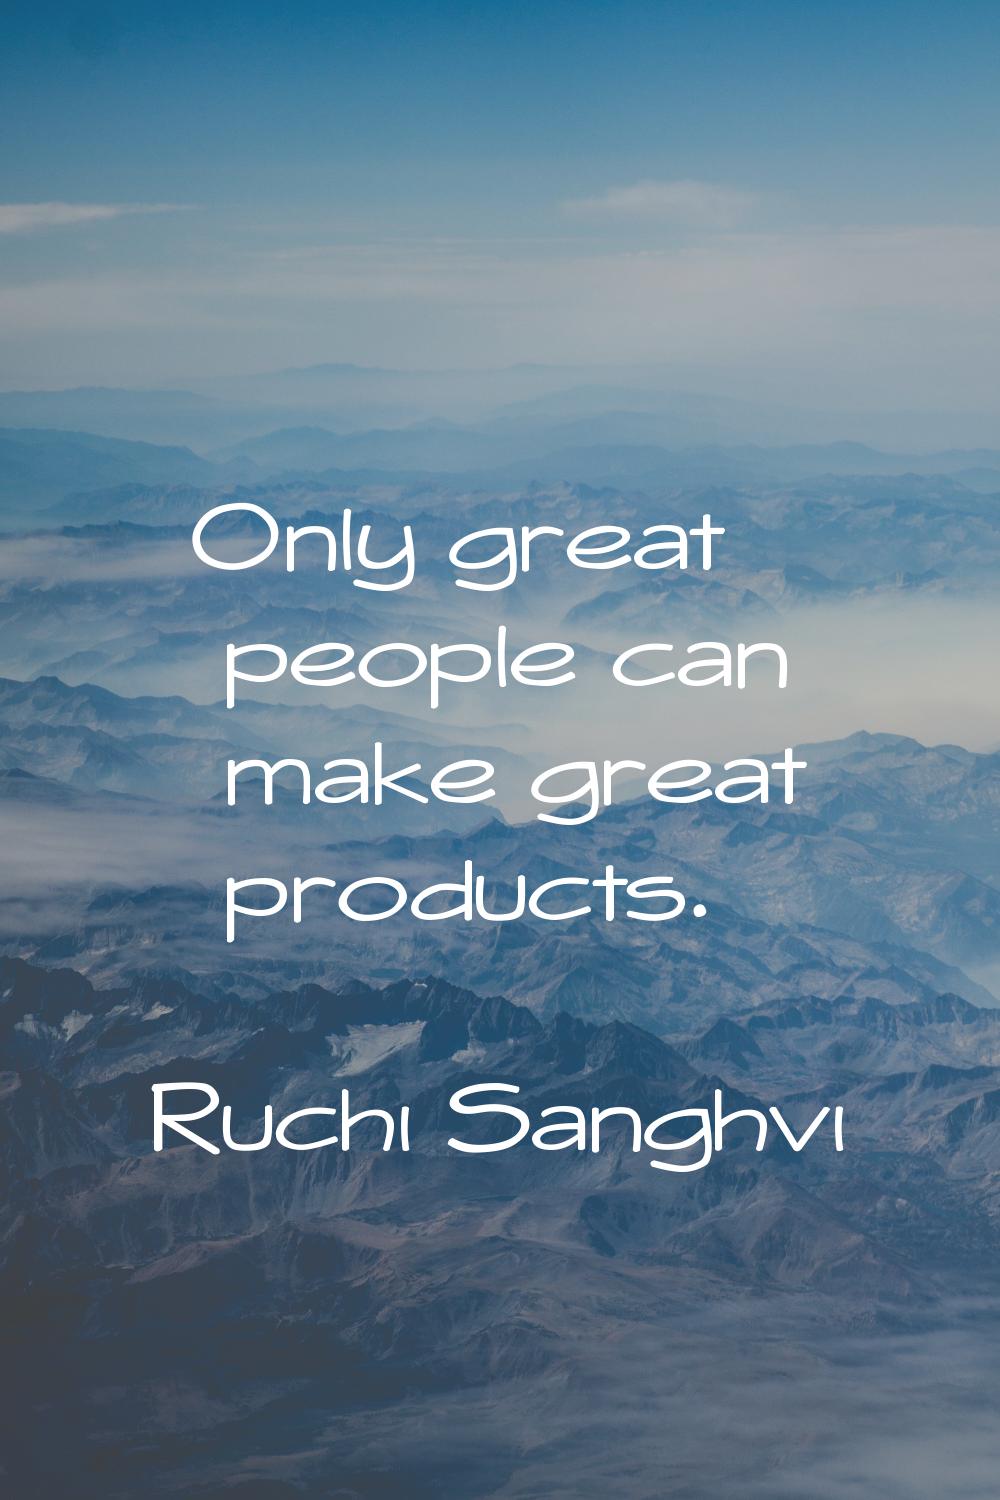 Only great people can make great products.